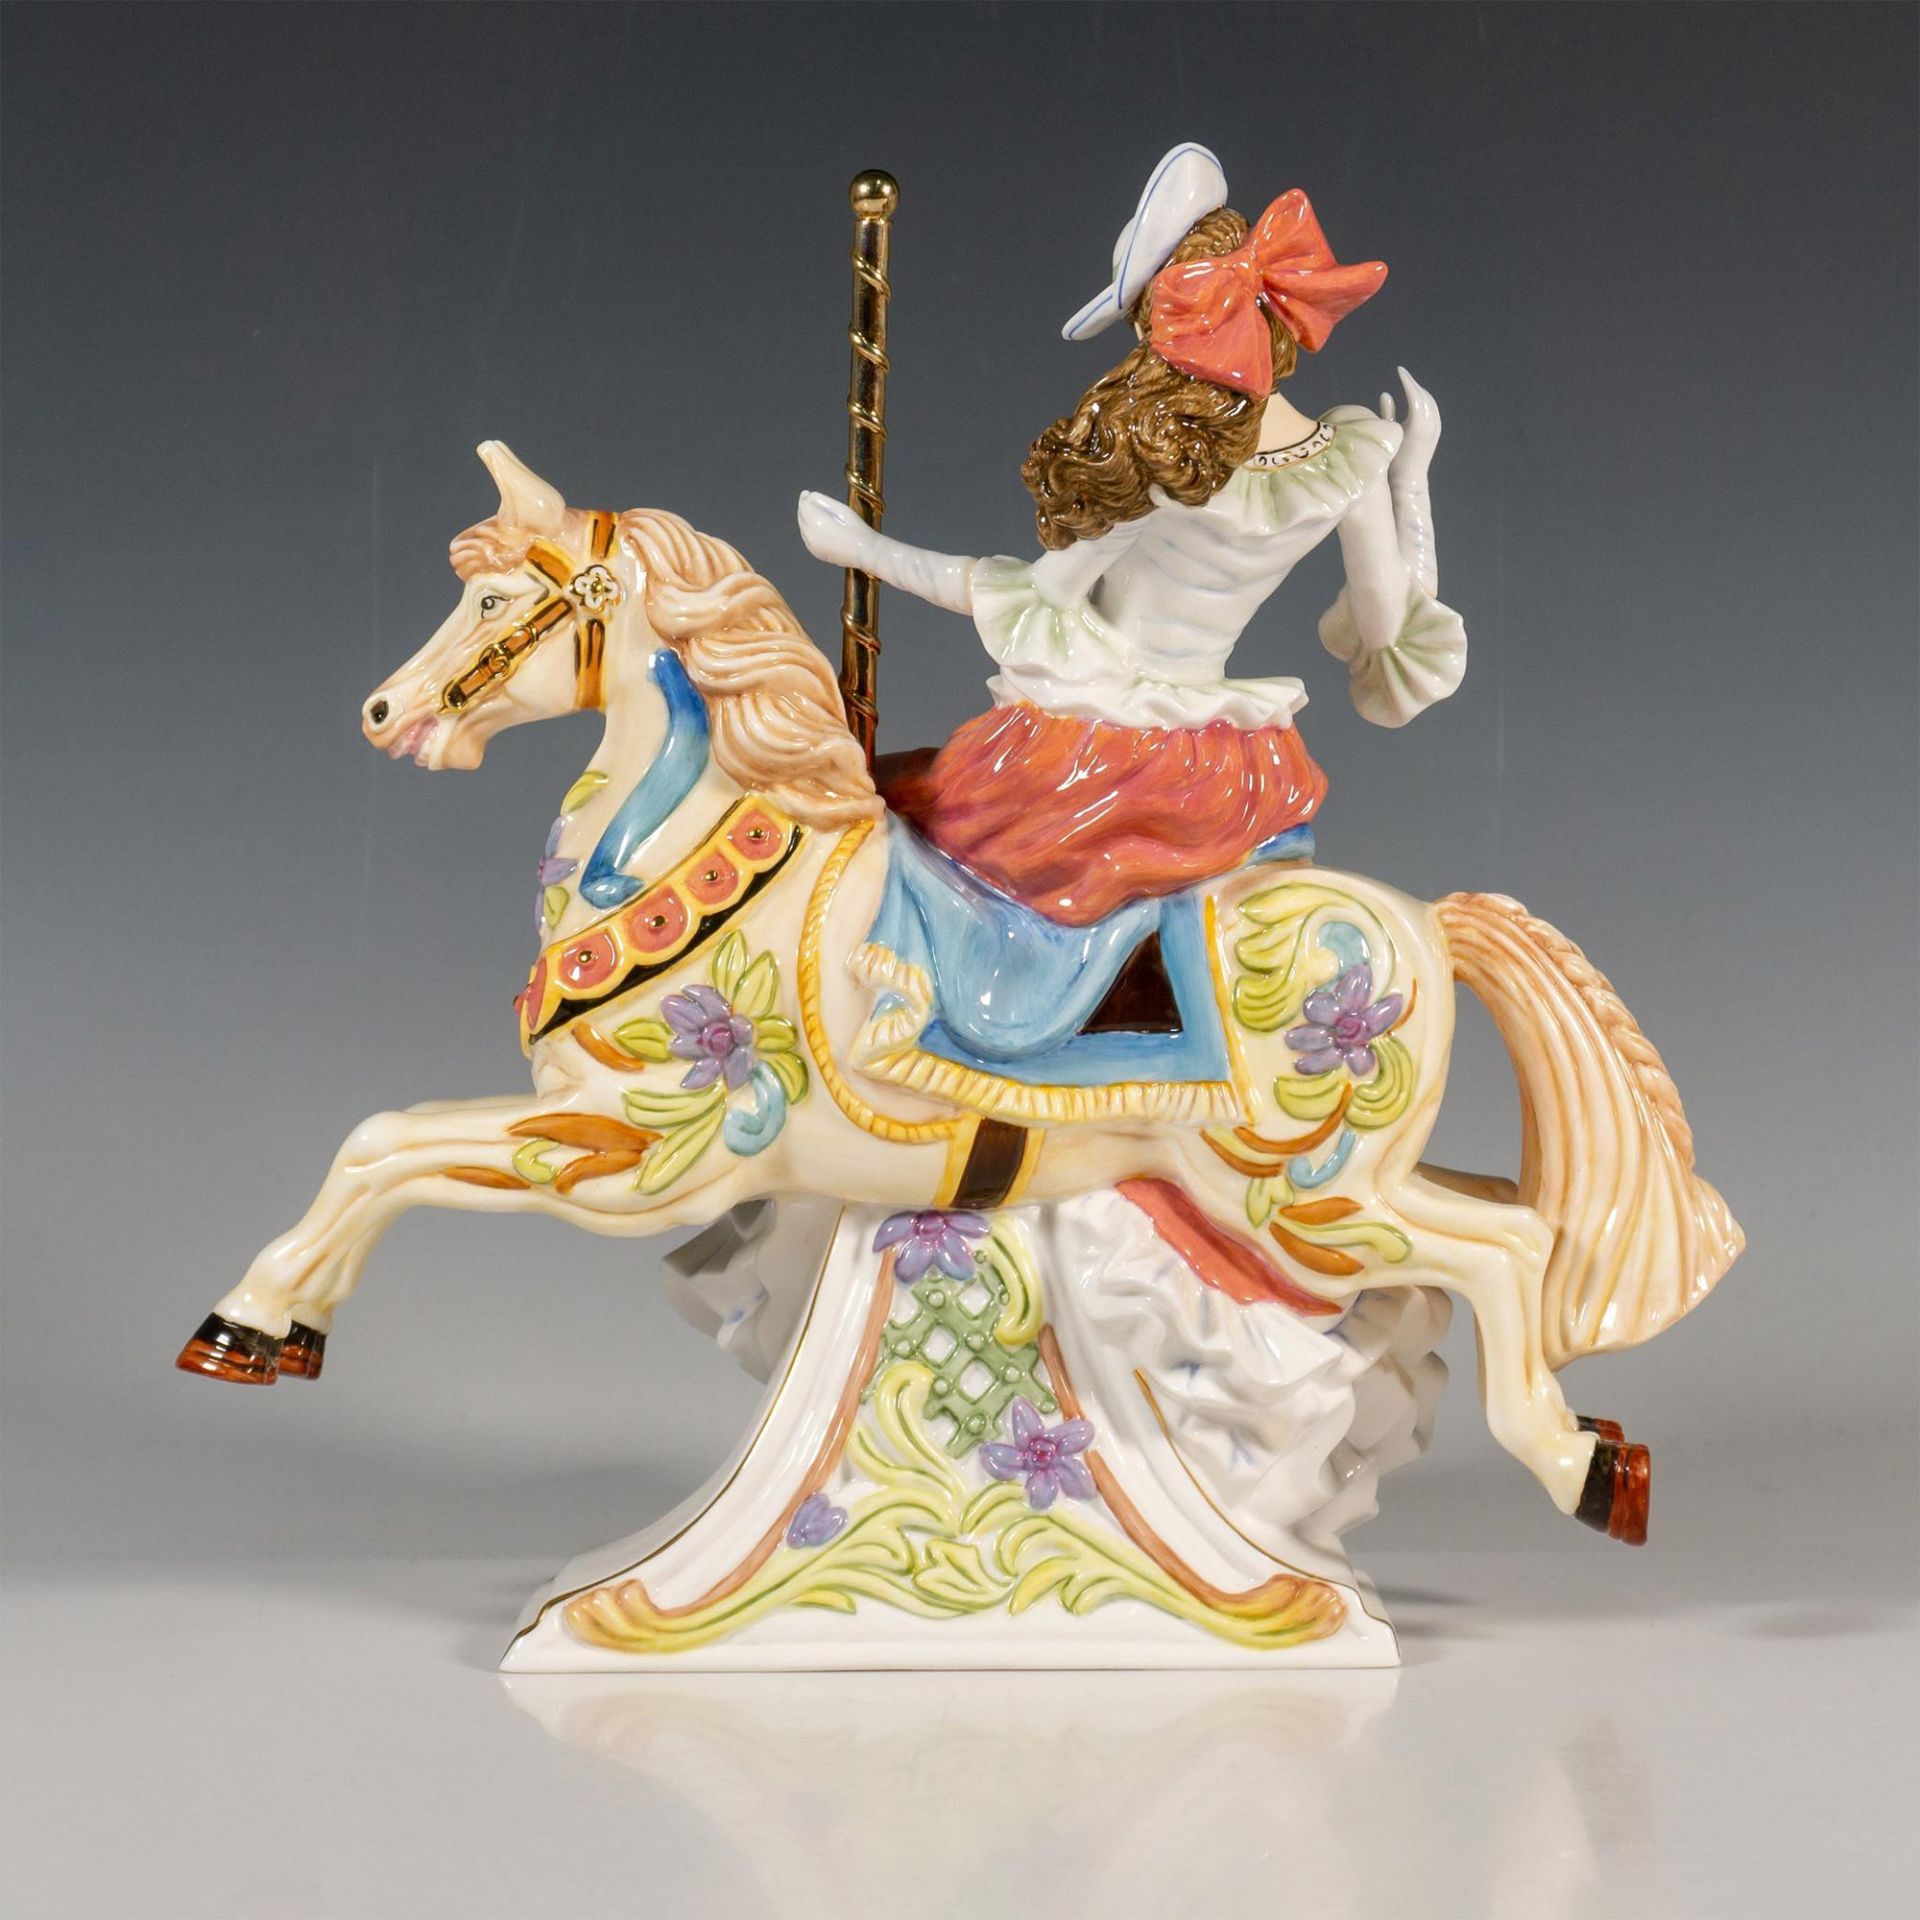 The English Ladies Porcelain Figurine, Carousel Collection - Image 3 of 4